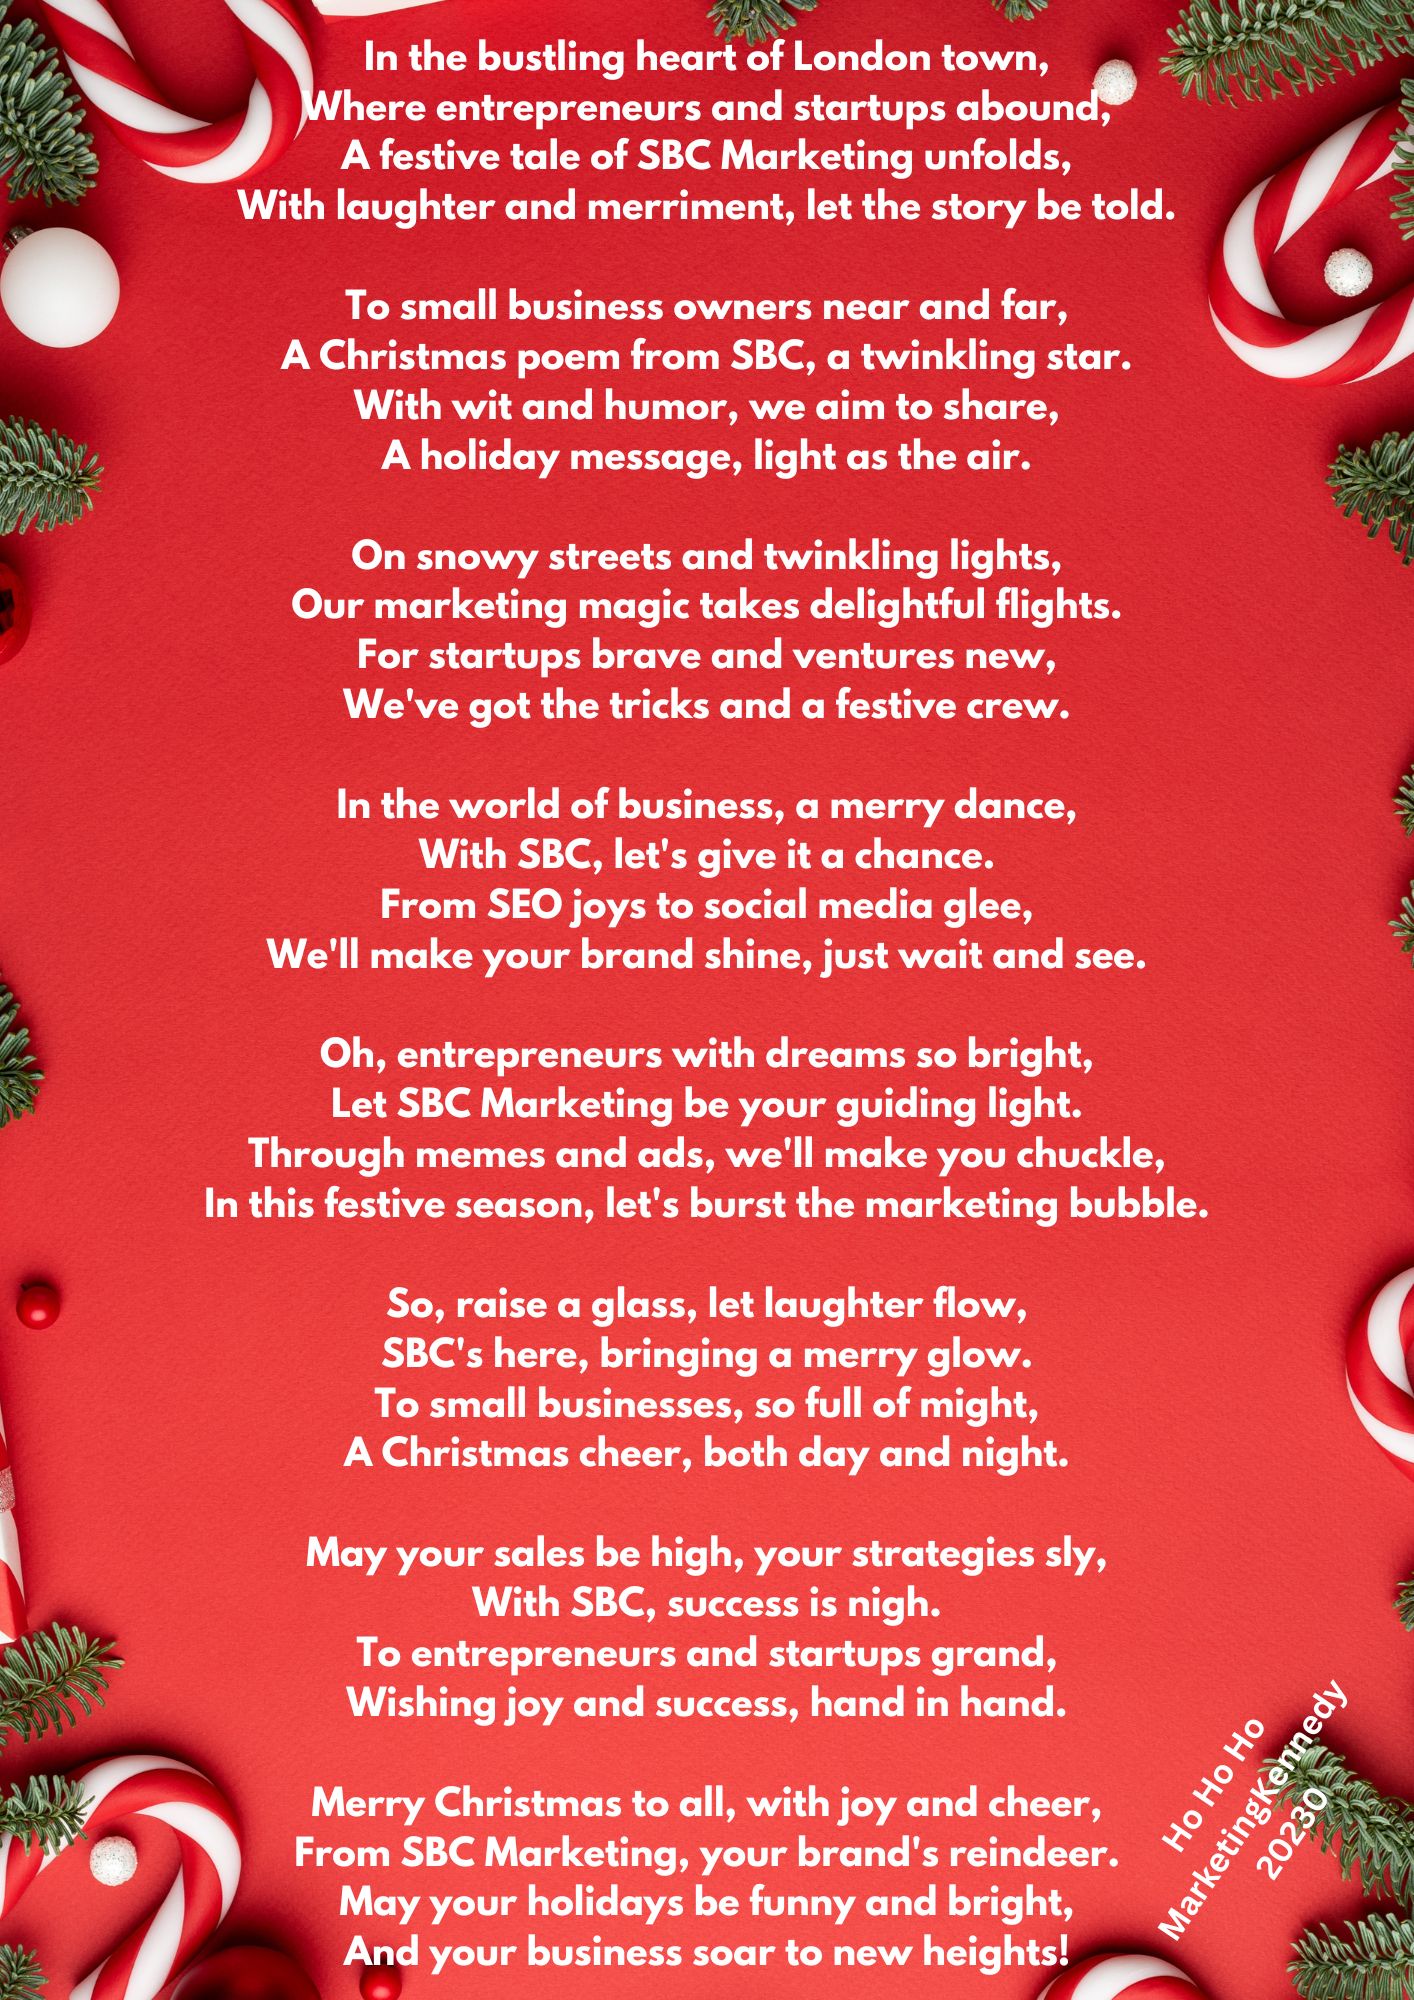 Unwrap the Gift of Laughter: A Poetic Festivity from SBC Marketing